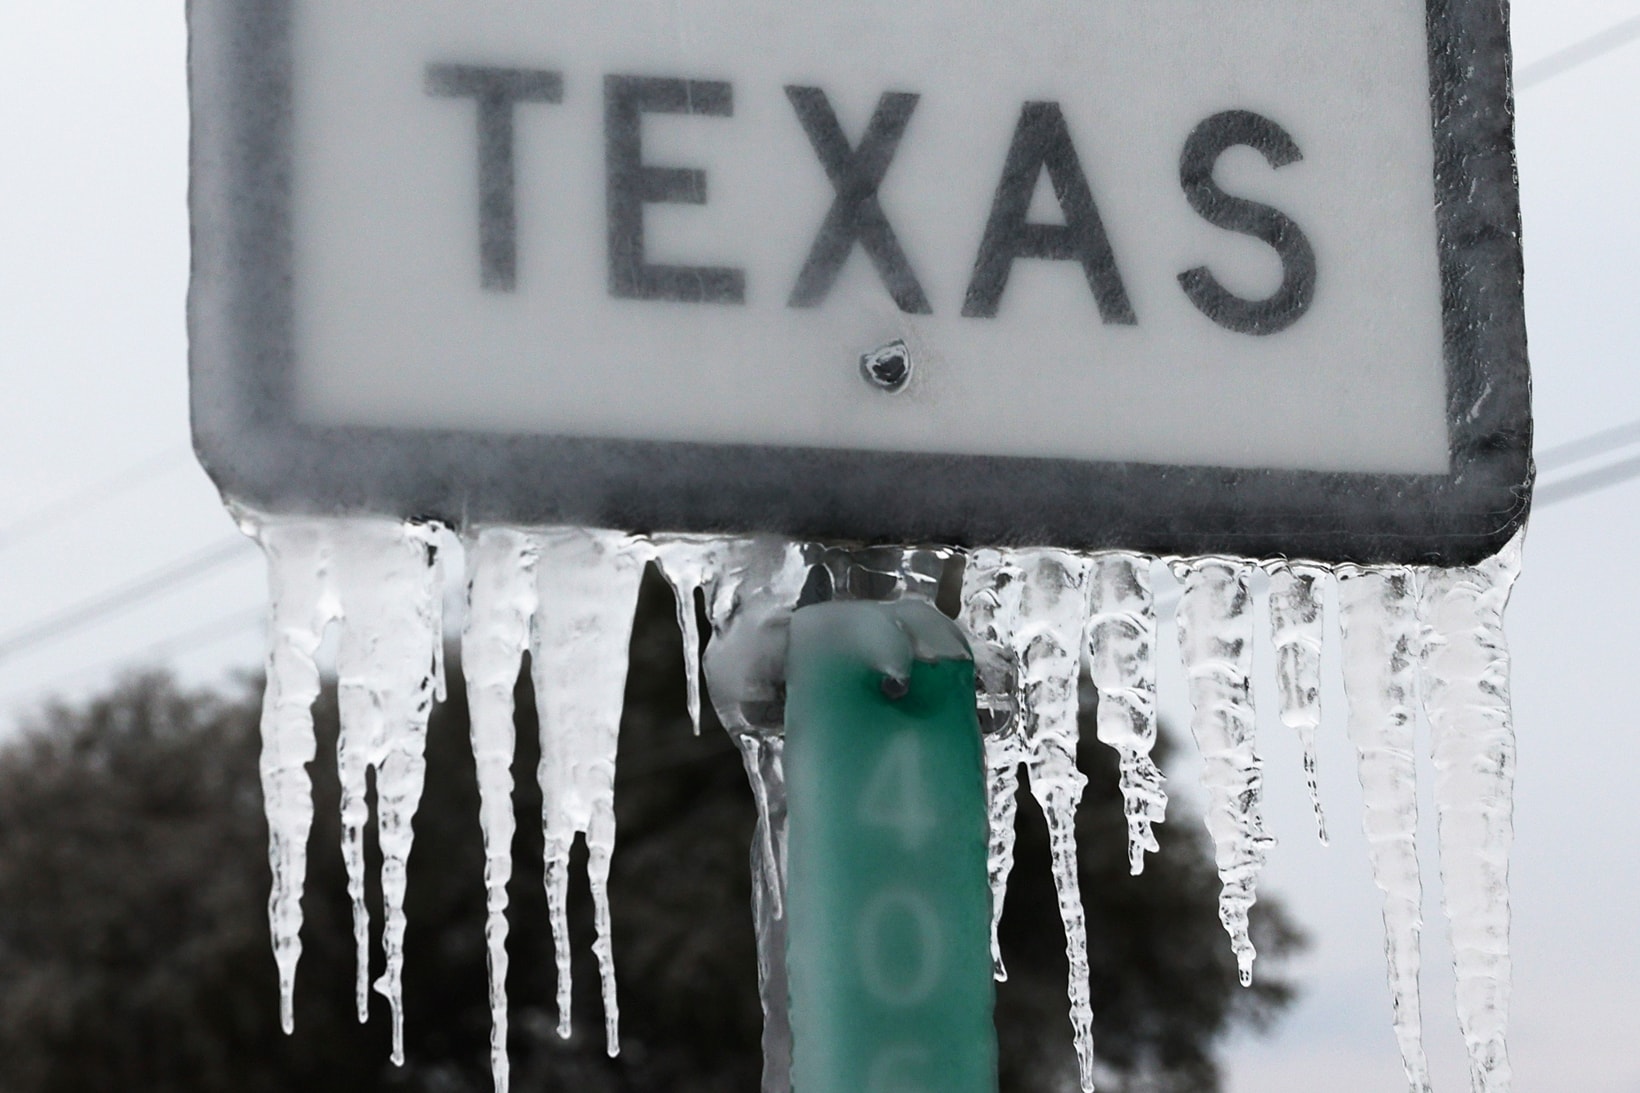 Texas Winter Storm 2021 Icicles Sign